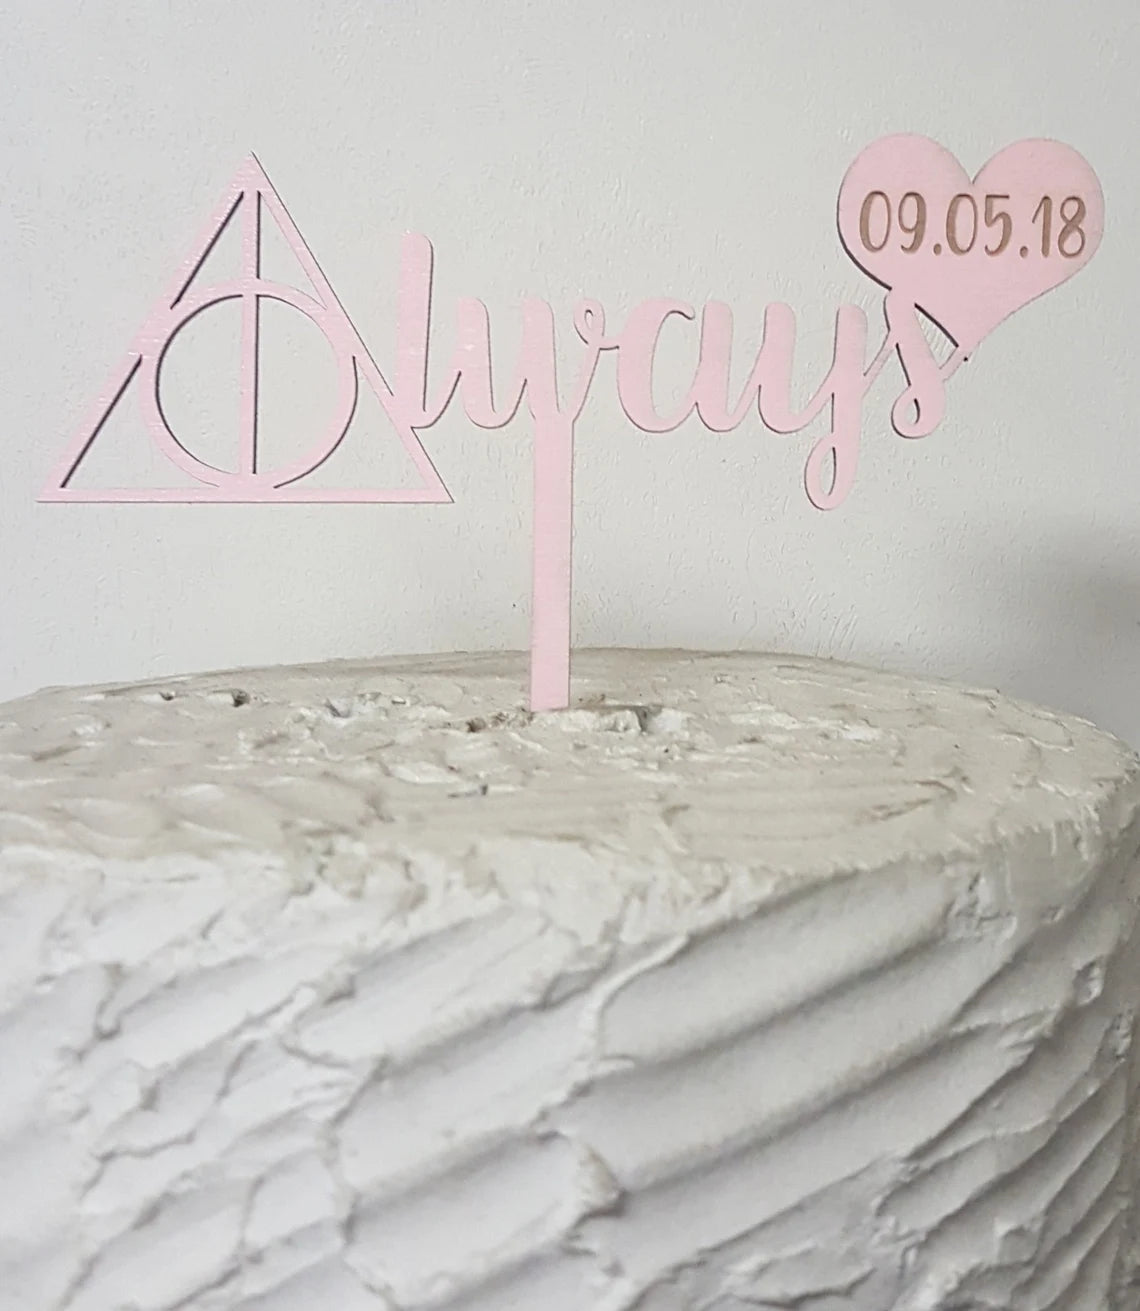 Custom Inspired Always with Heart and Date Love Wedding or Anniversary Laser Cut Natural Wood Cake Topper Decoration